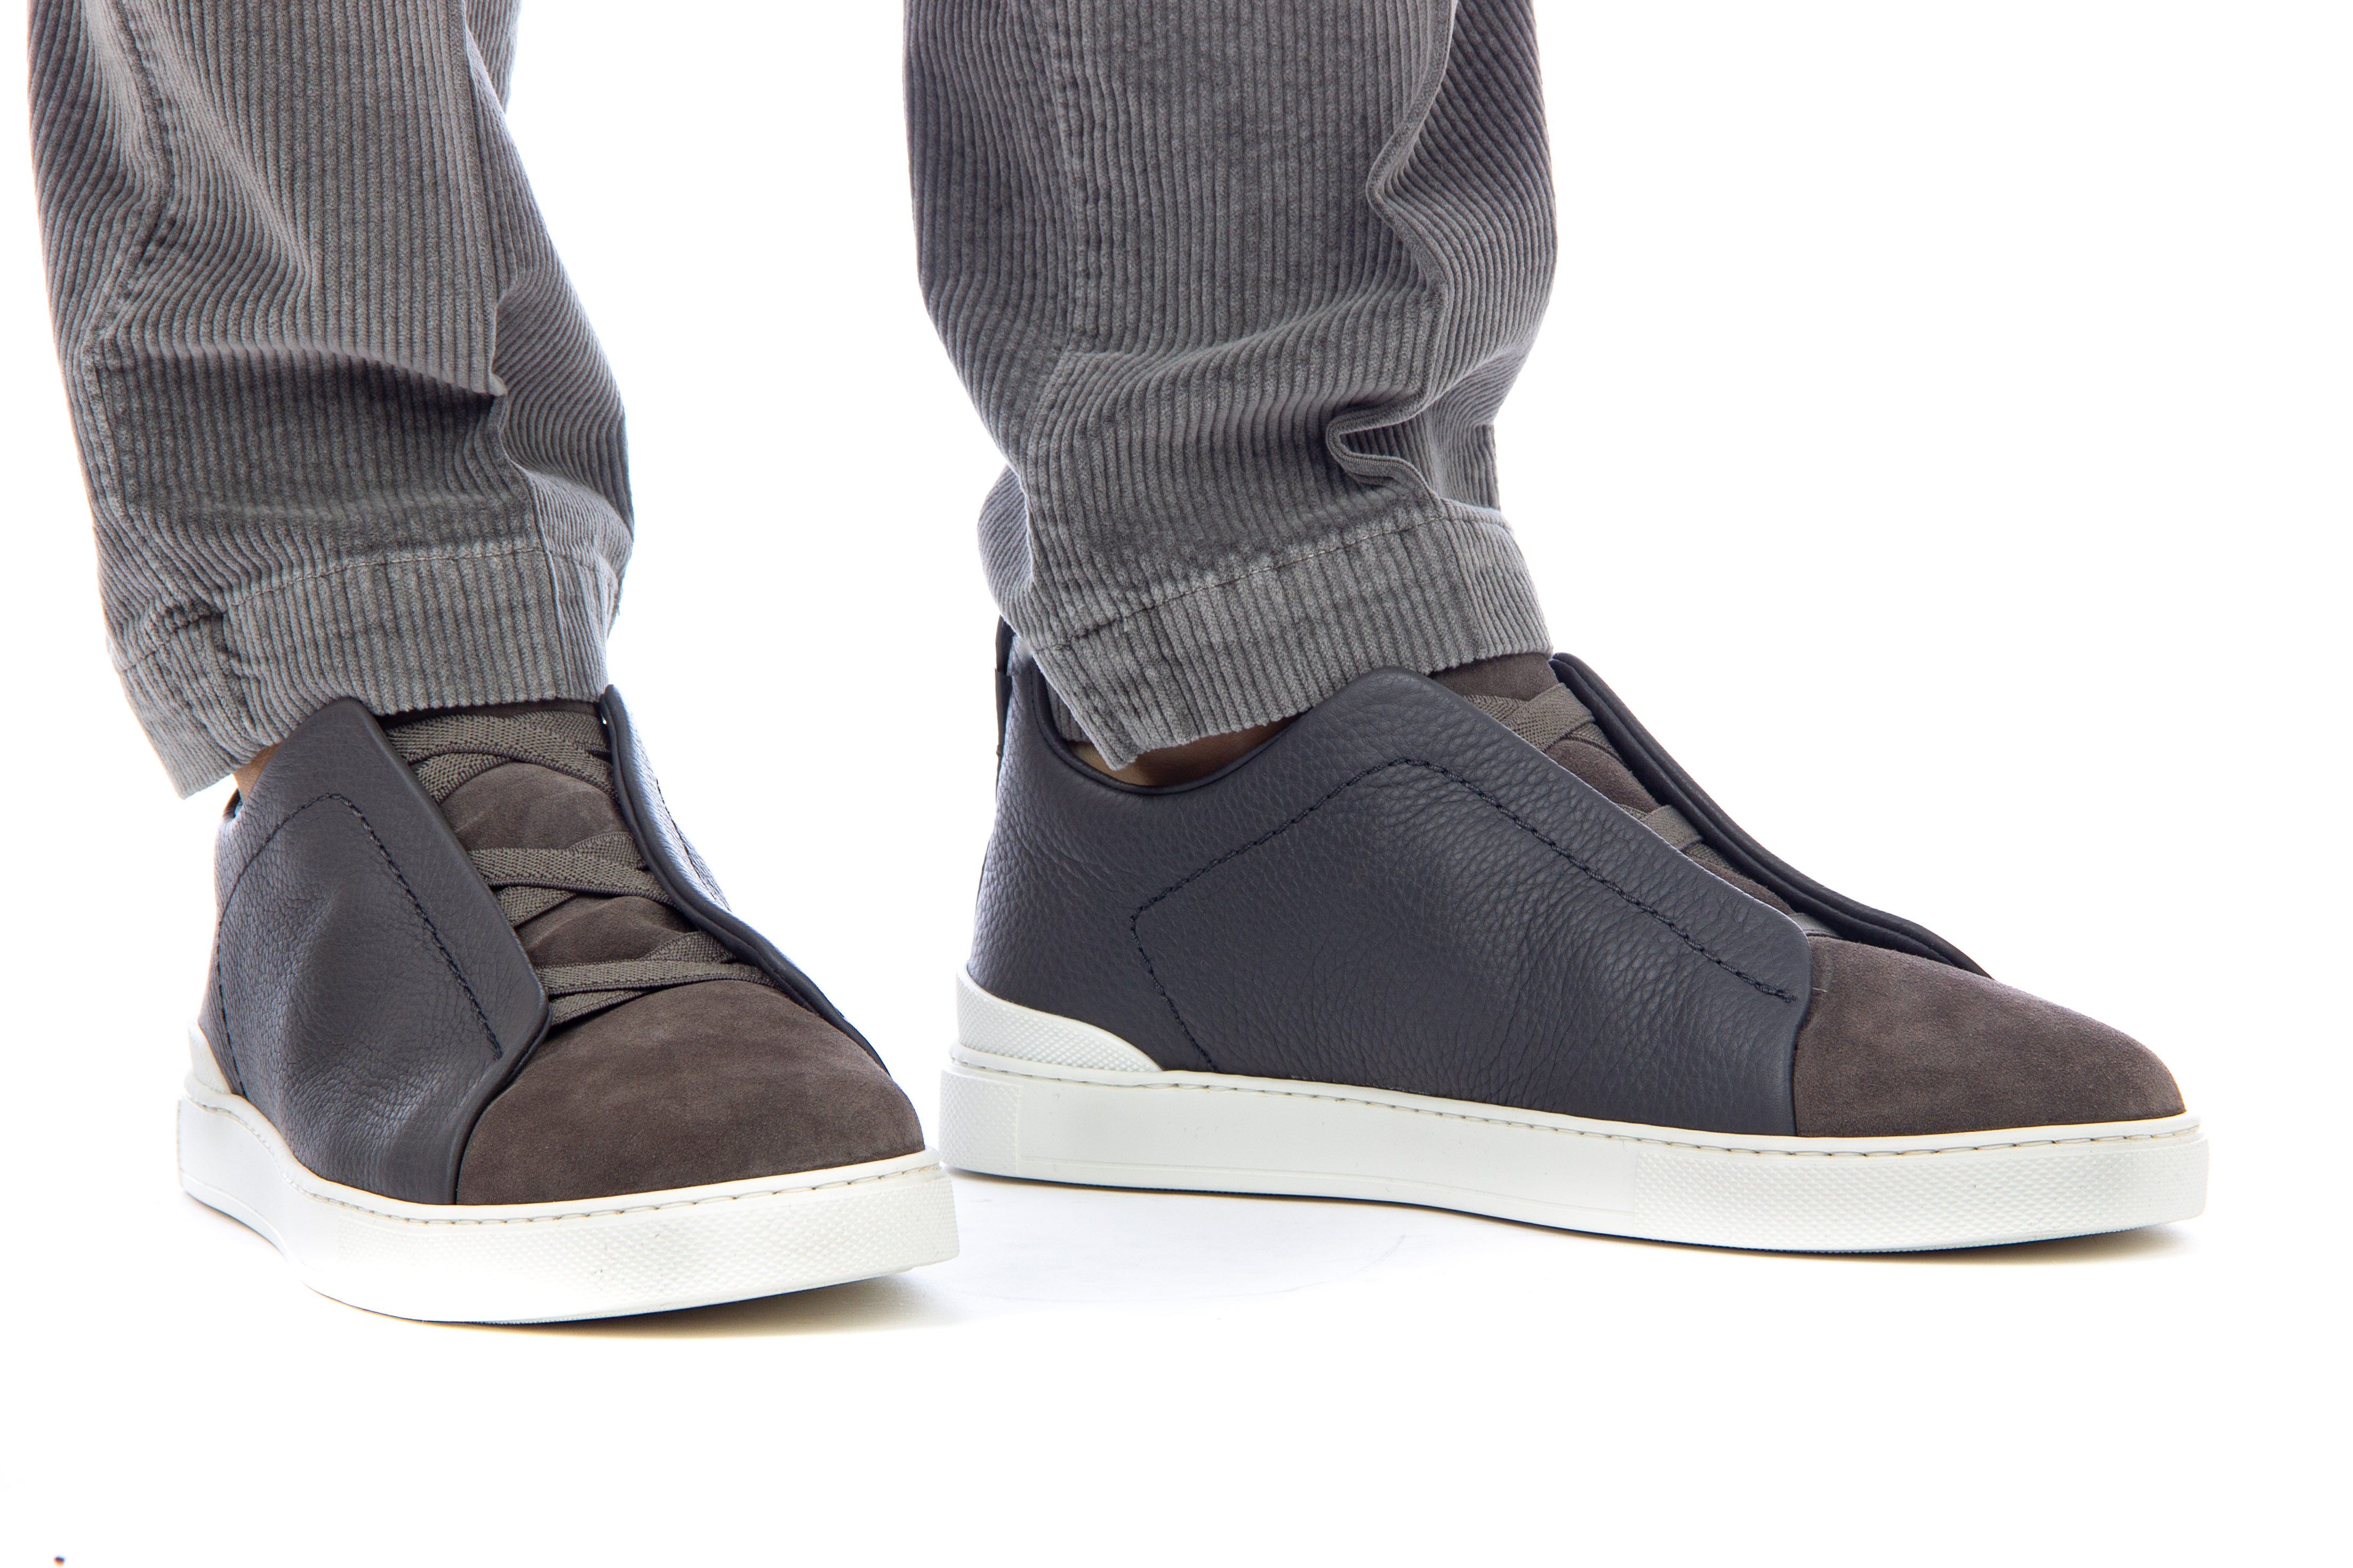 Triple stitch bi-material sneakers in leather and suede